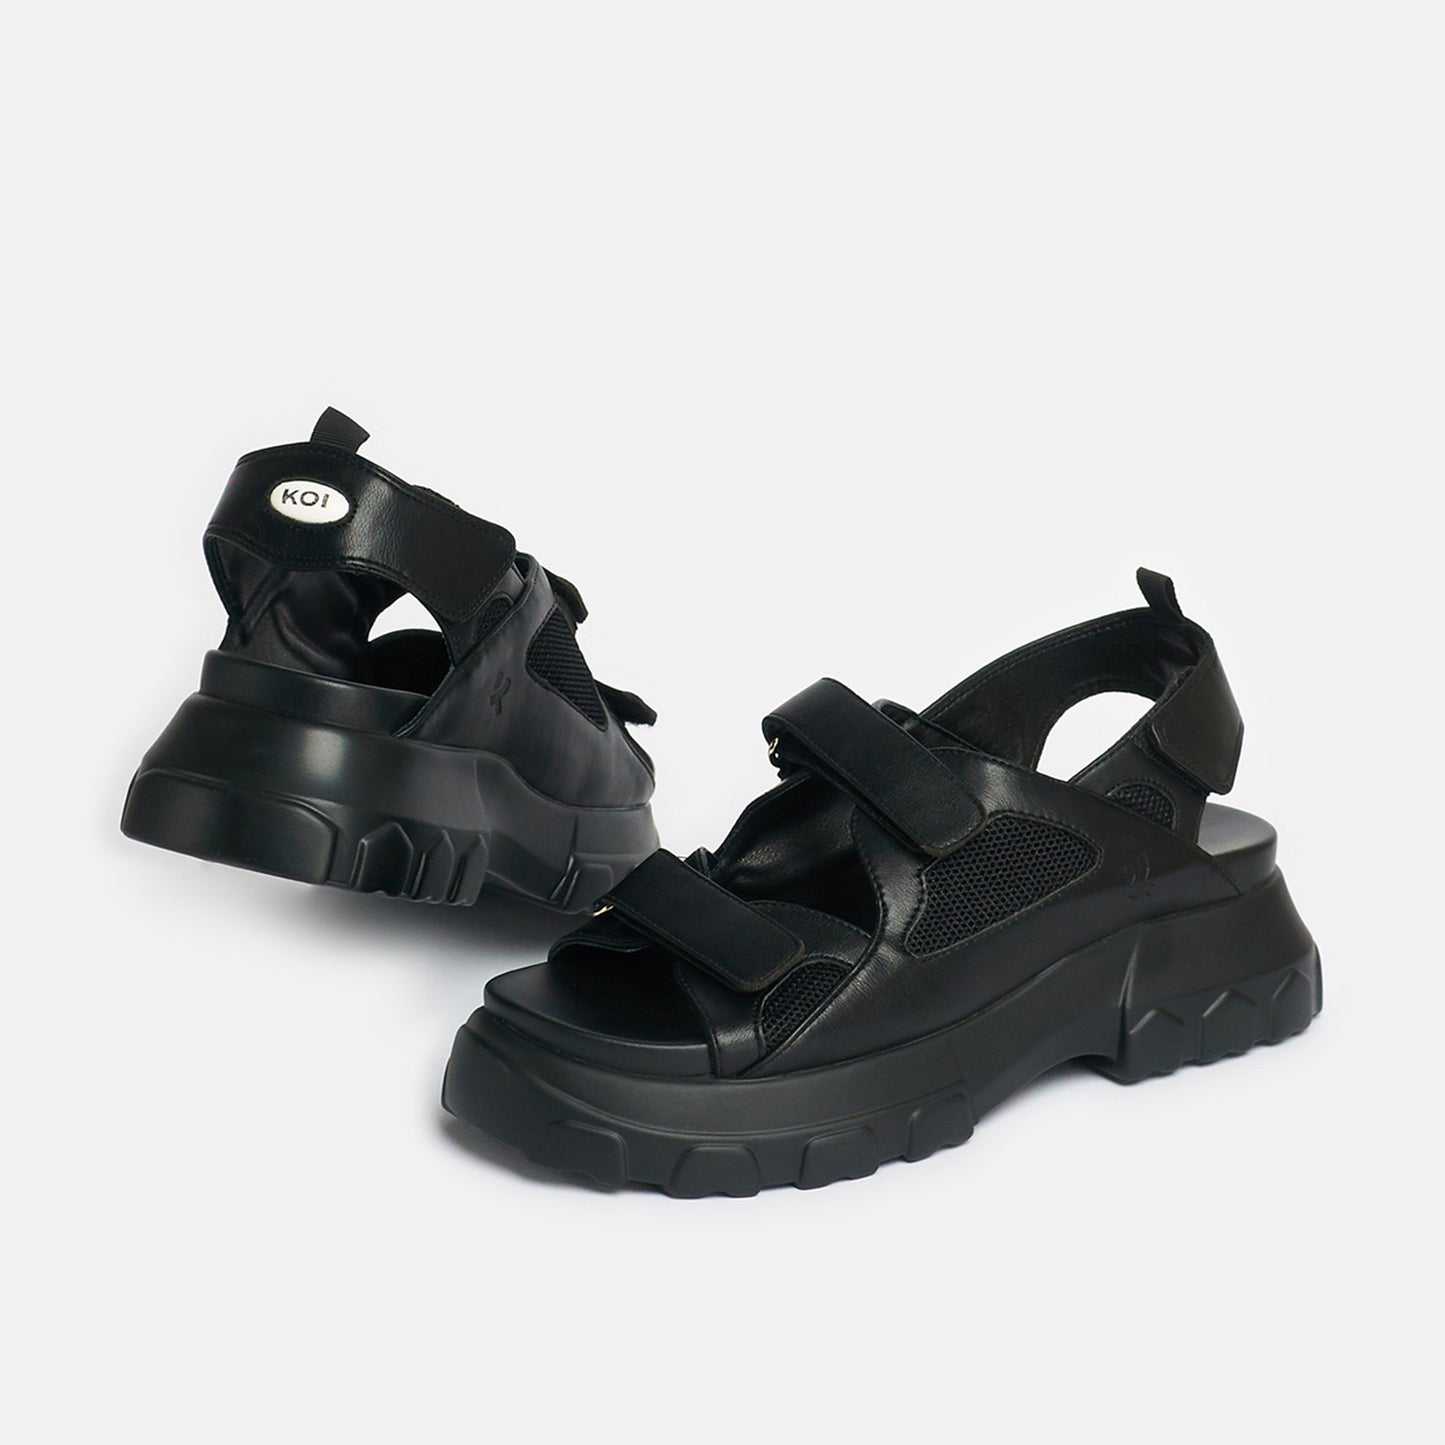 Fated Love Black Chunky Sandals - Sandals - KOI Footwear - Black - Side and Back View